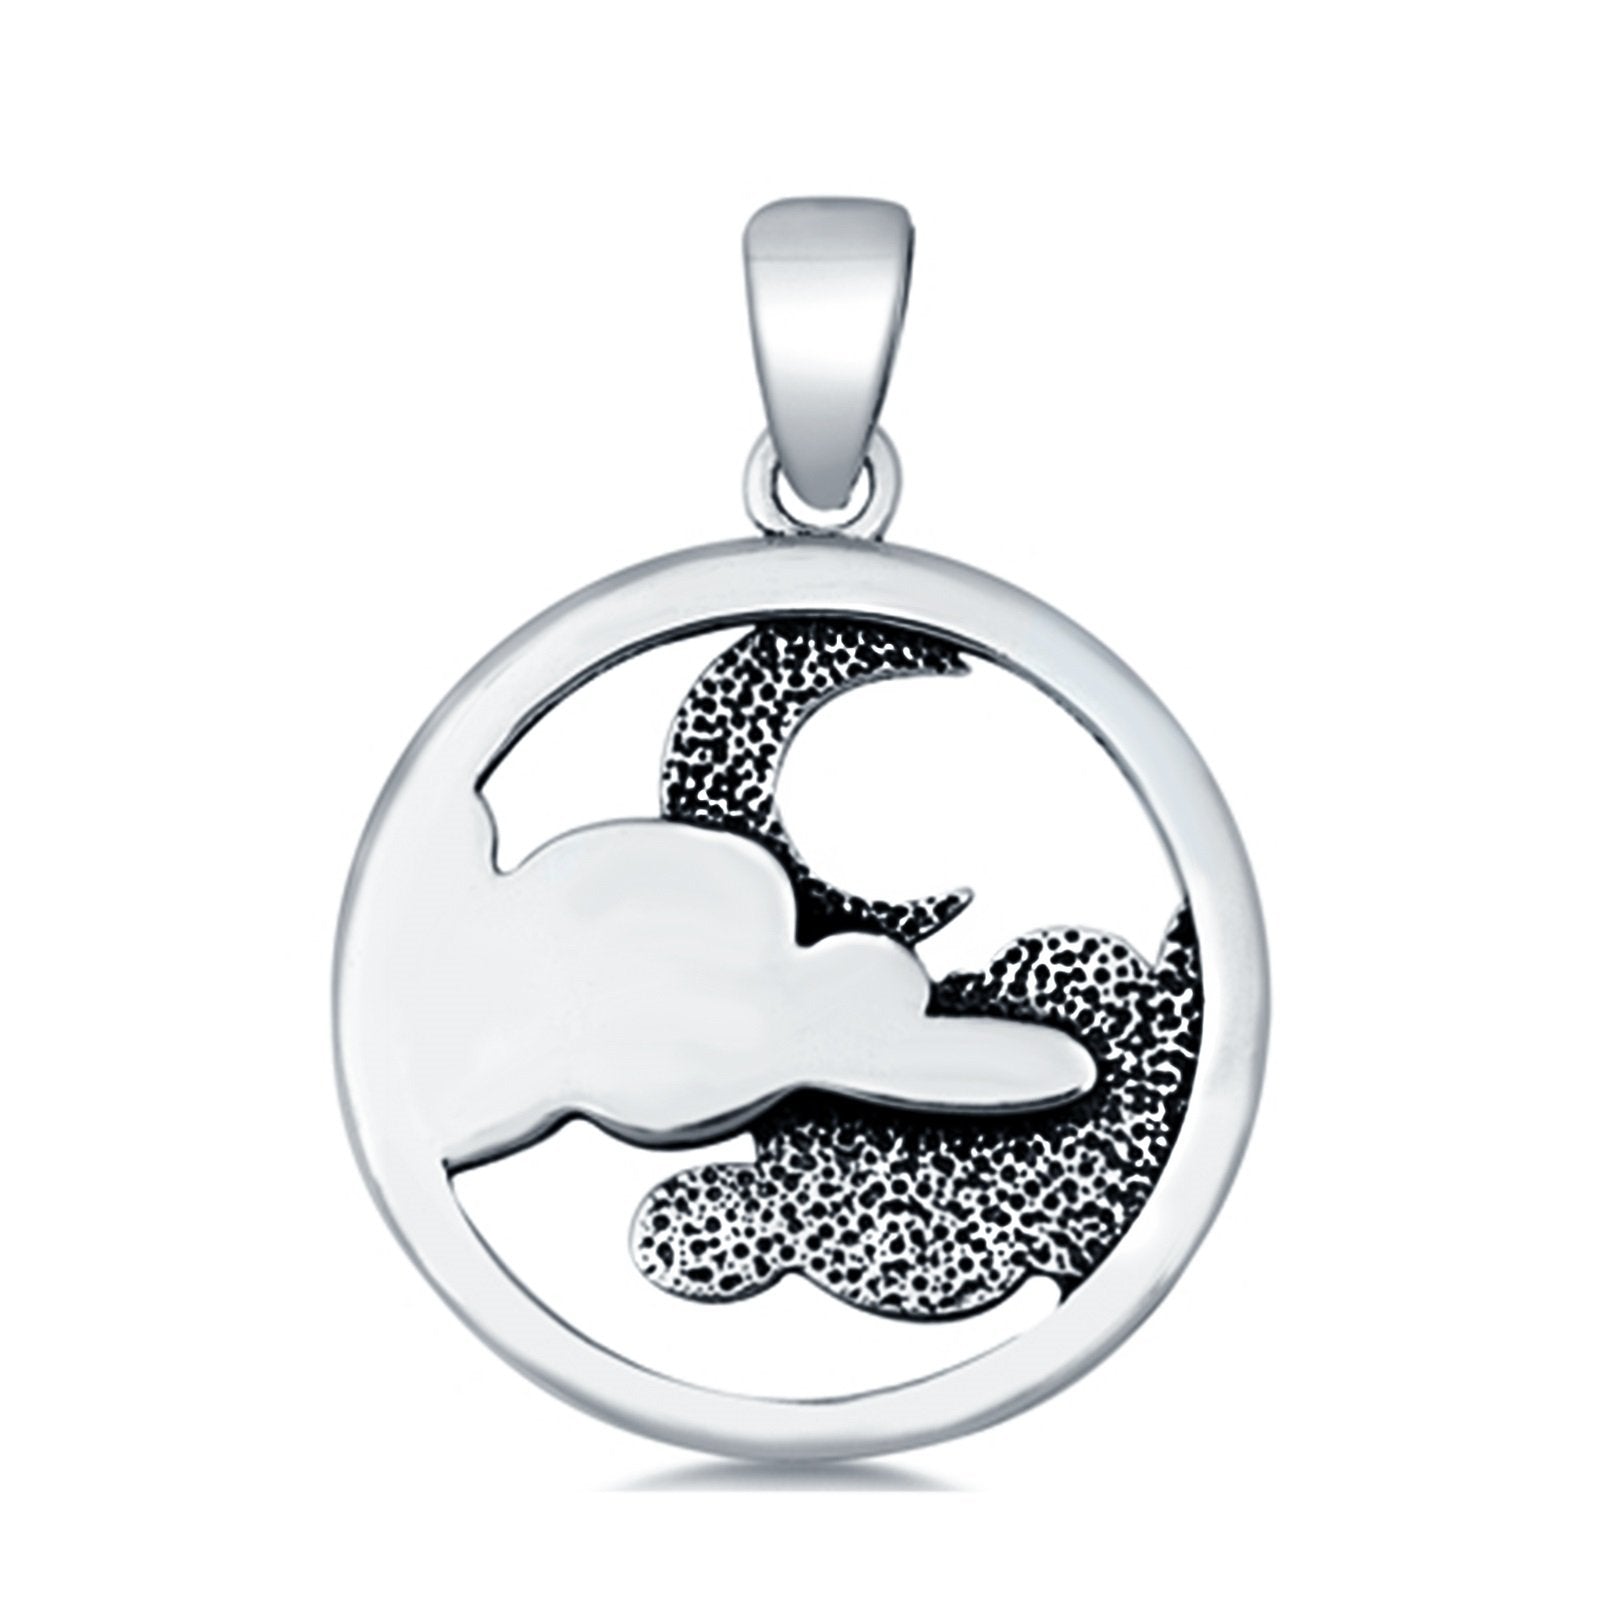 Moon & Clouds Charm Pendant Round 925 Sterling Silver